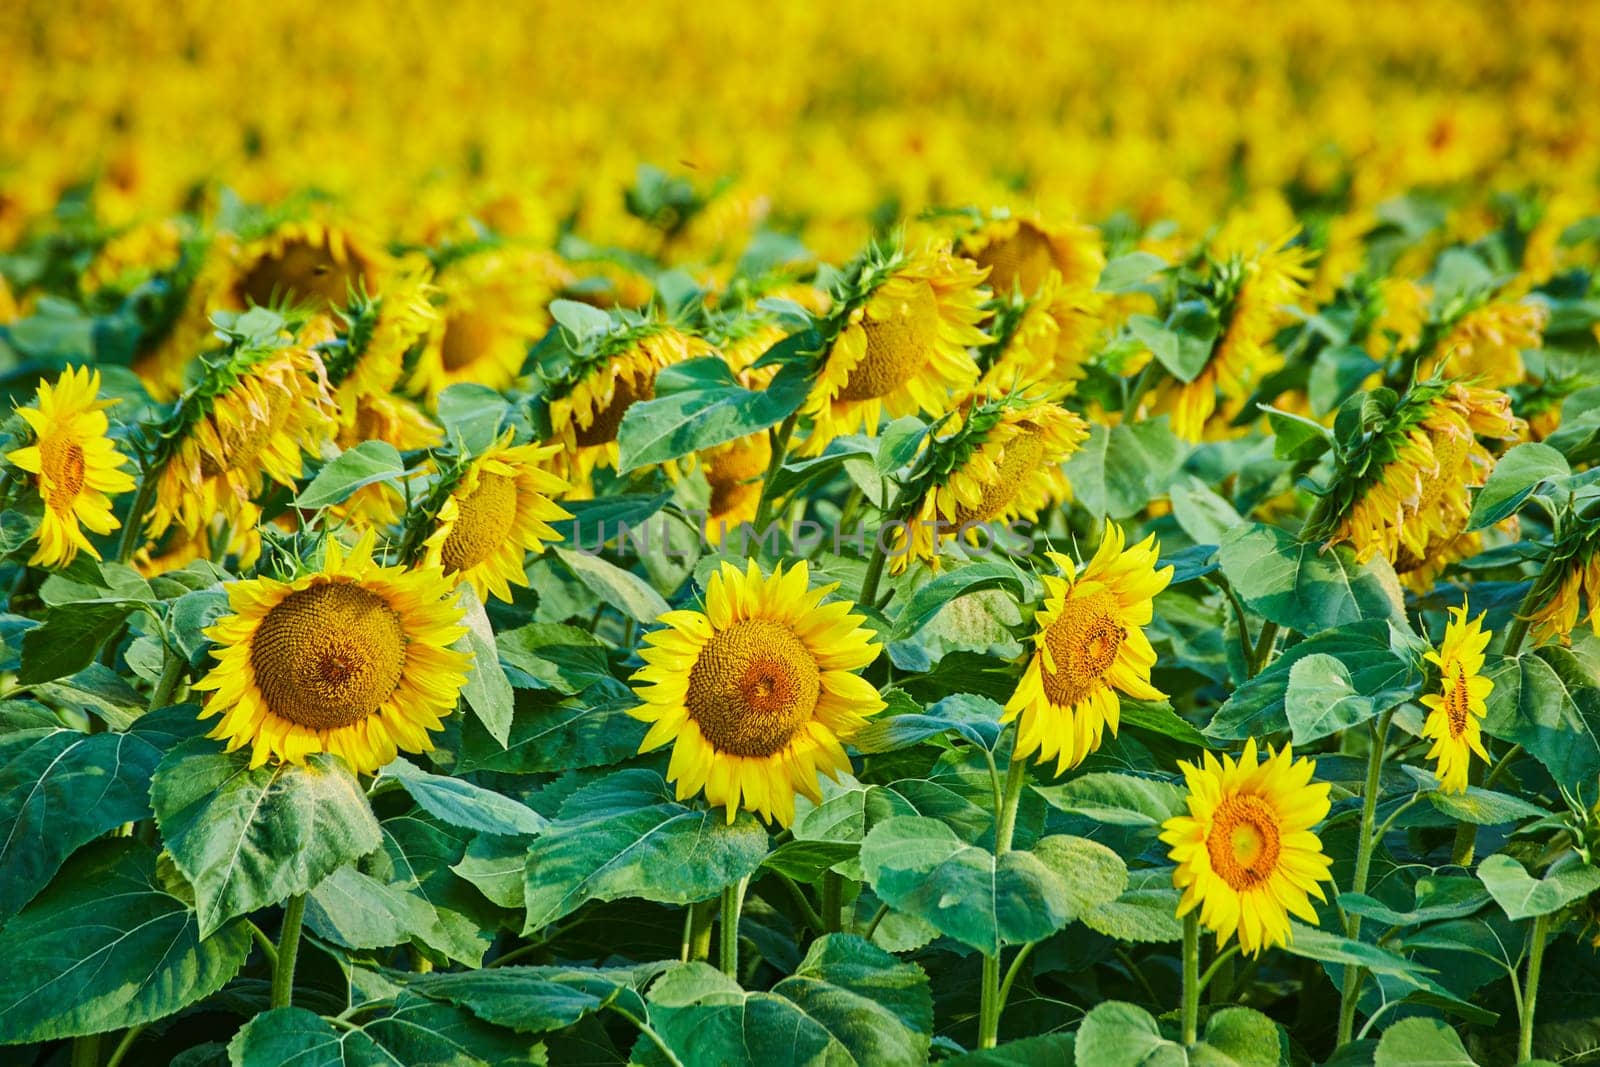 Image of Close up of large sunflower field with blurry yellow flowers behind first rows